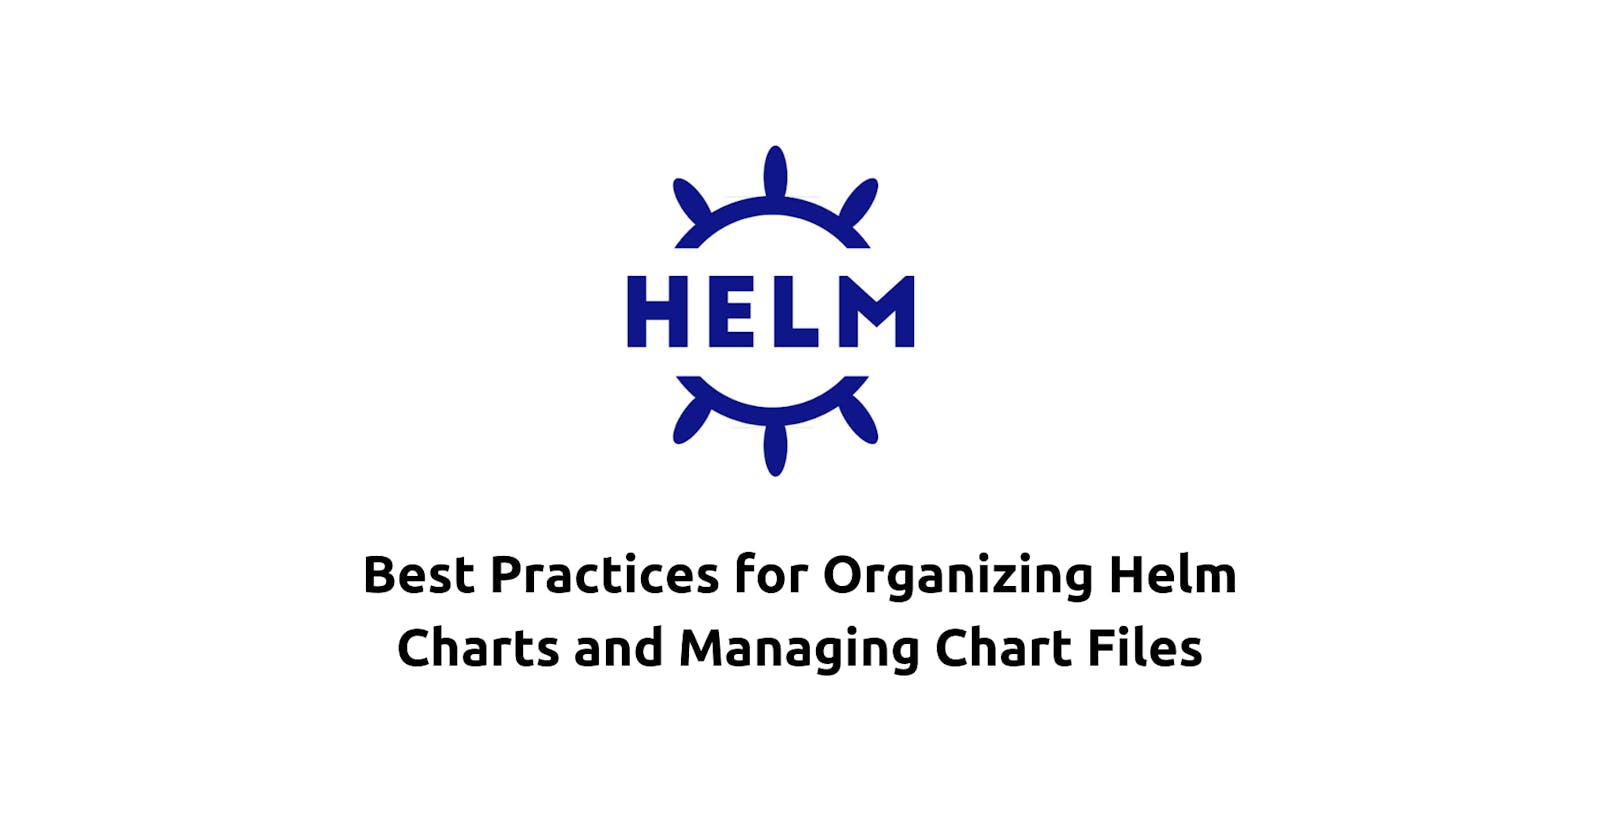 Best Practices for Organizing Helm Charts and Managing Chart Files